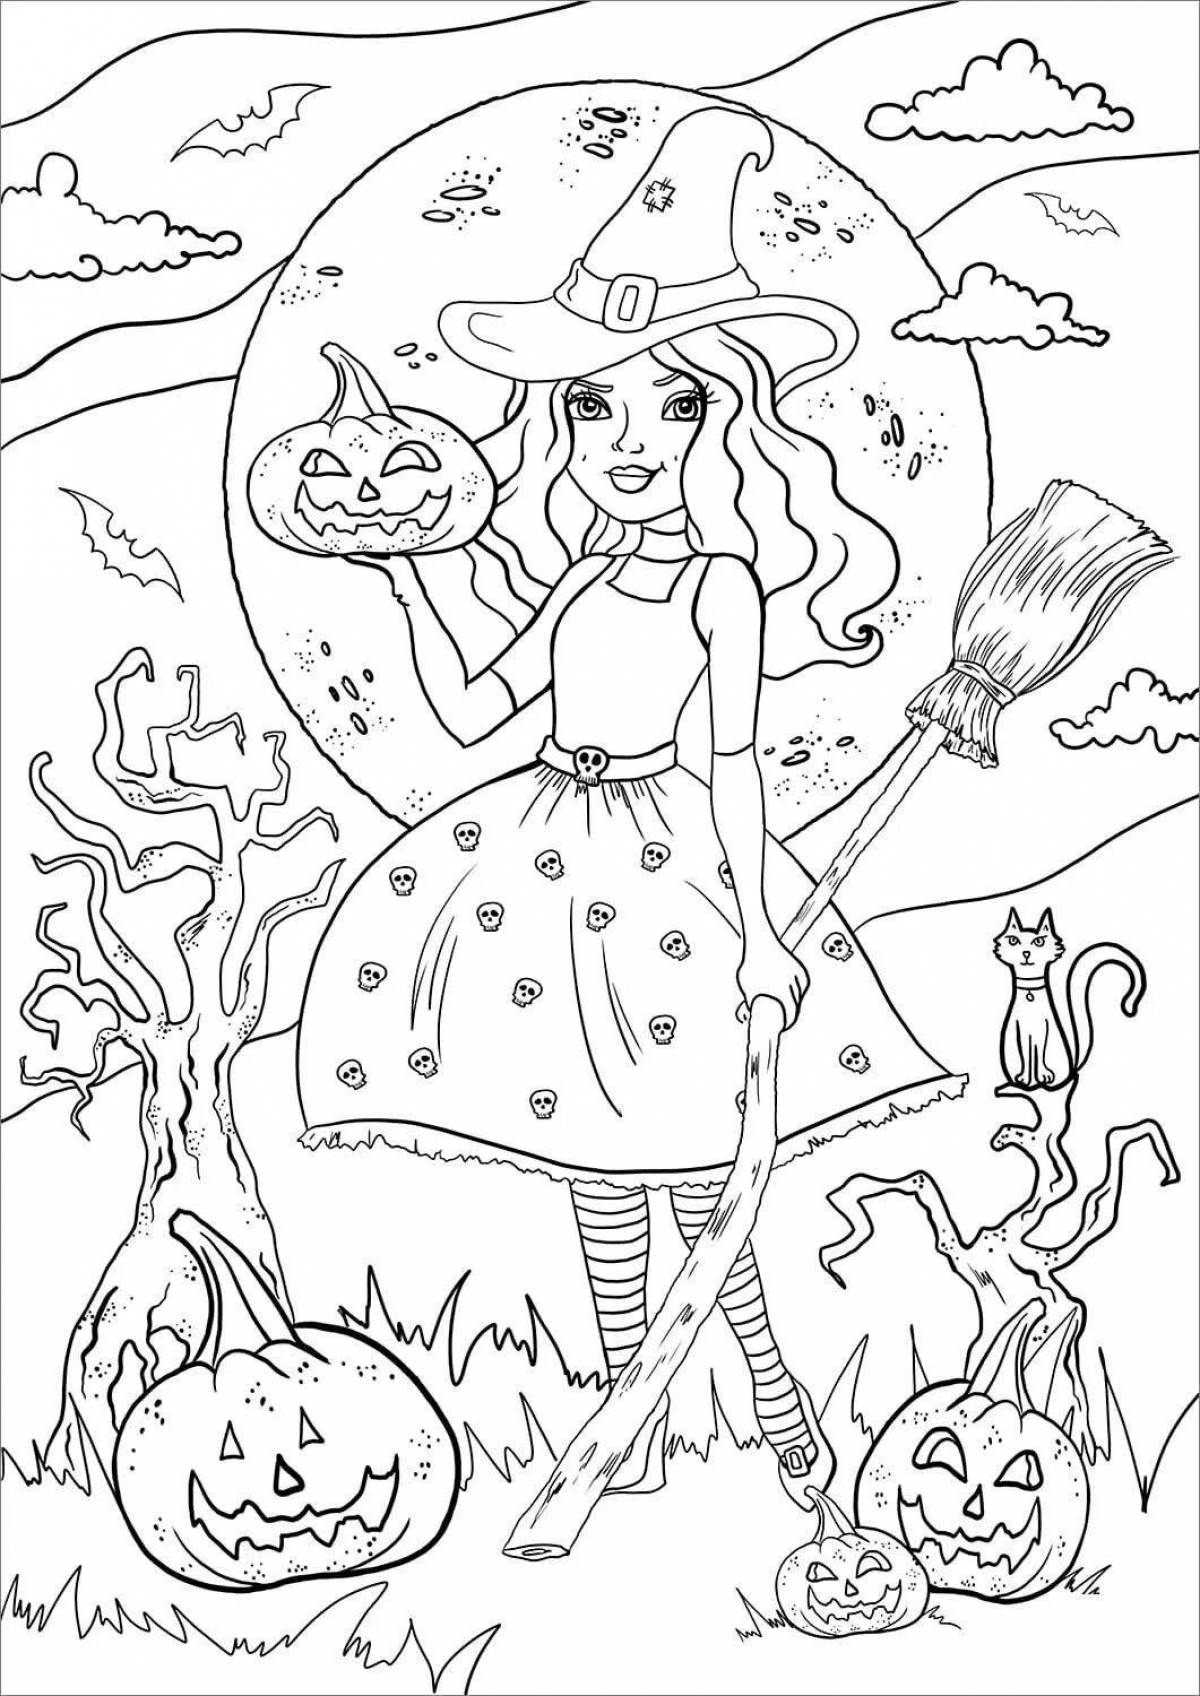 Exquisite halloween coloring book for girls